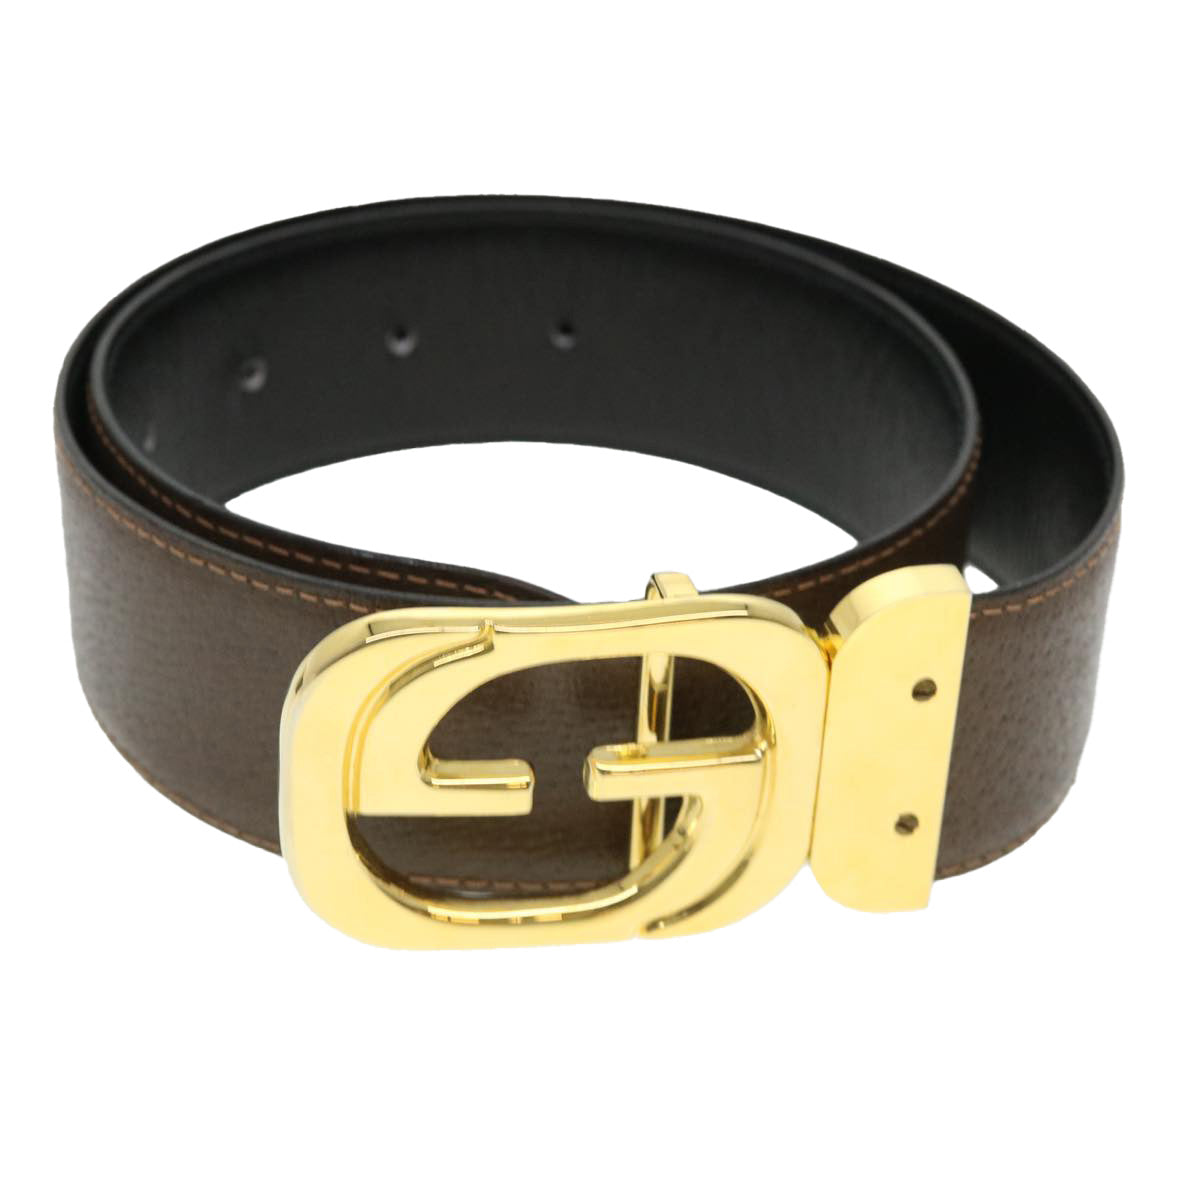 GUCCI Belt Leather 30.7"" Brown Auth th3511